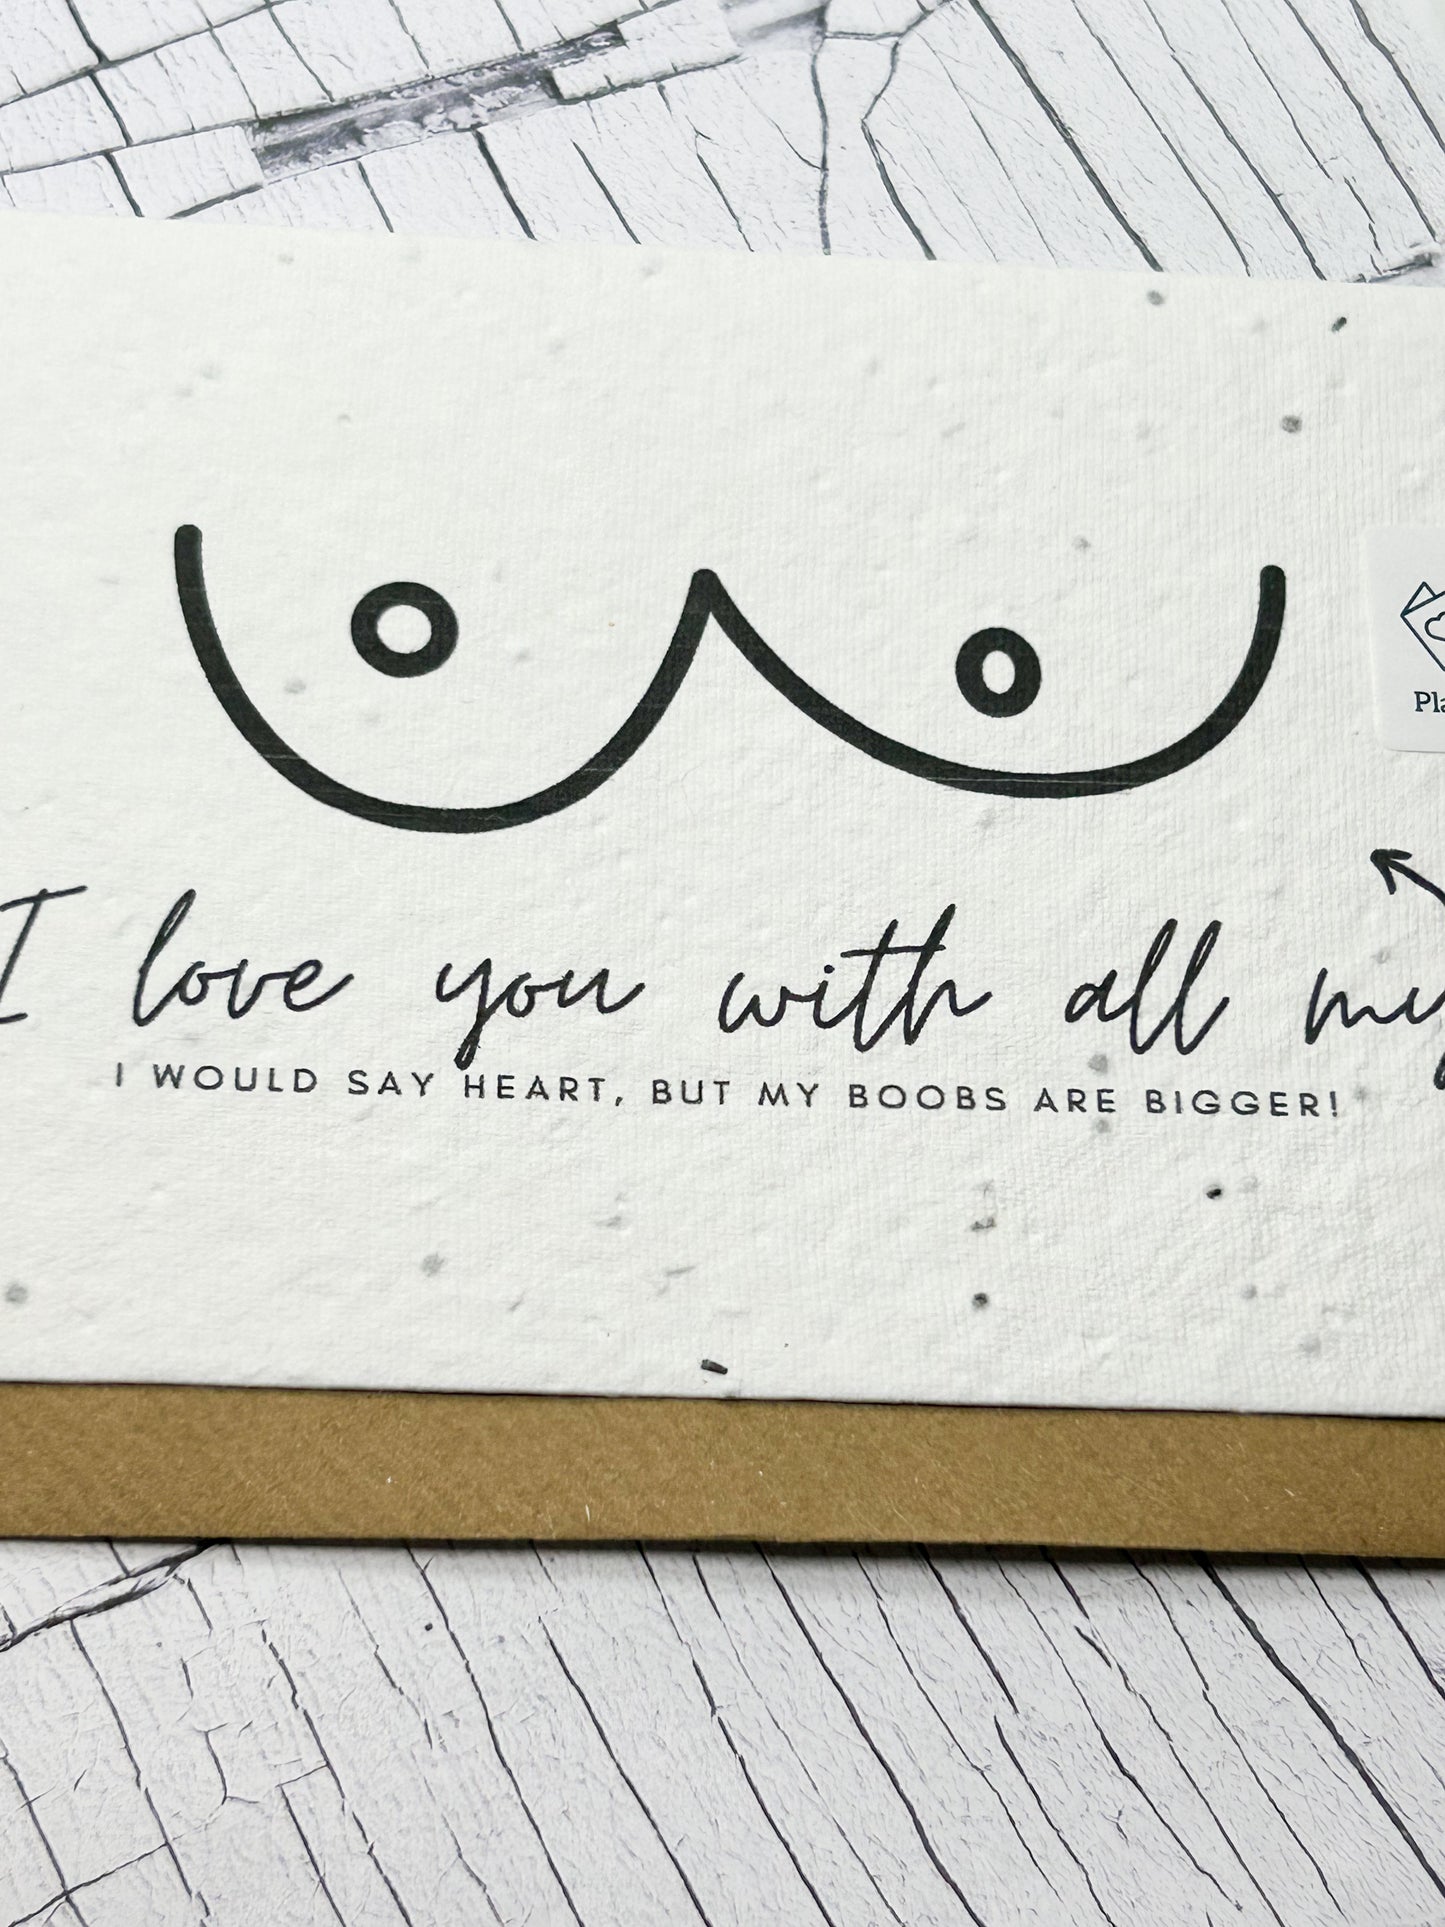 Seed Paper Card - Funny I Love you Card